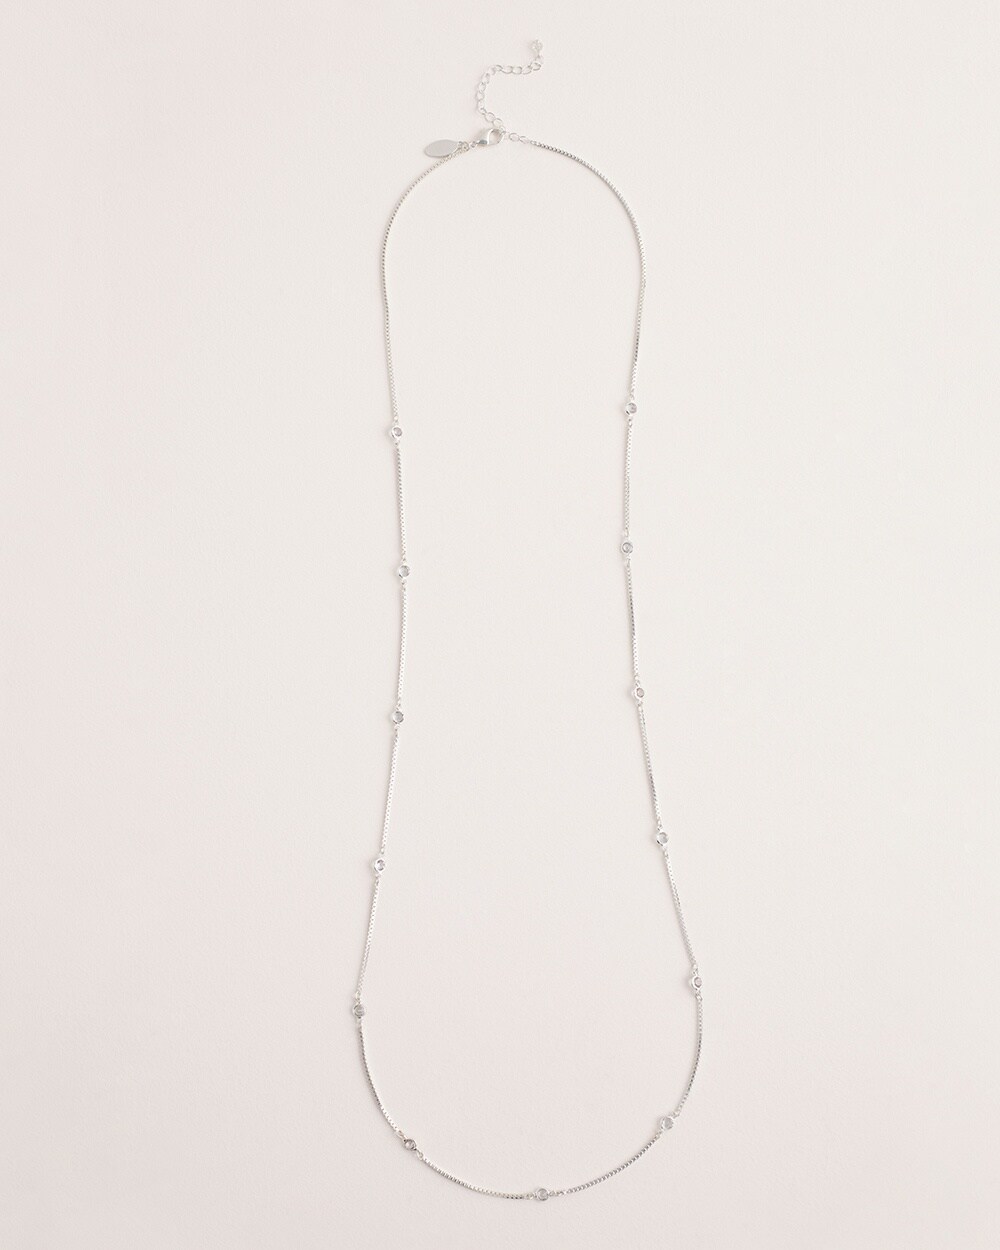 Long Single-Strand Silvertone Simulated Crystal Necklace